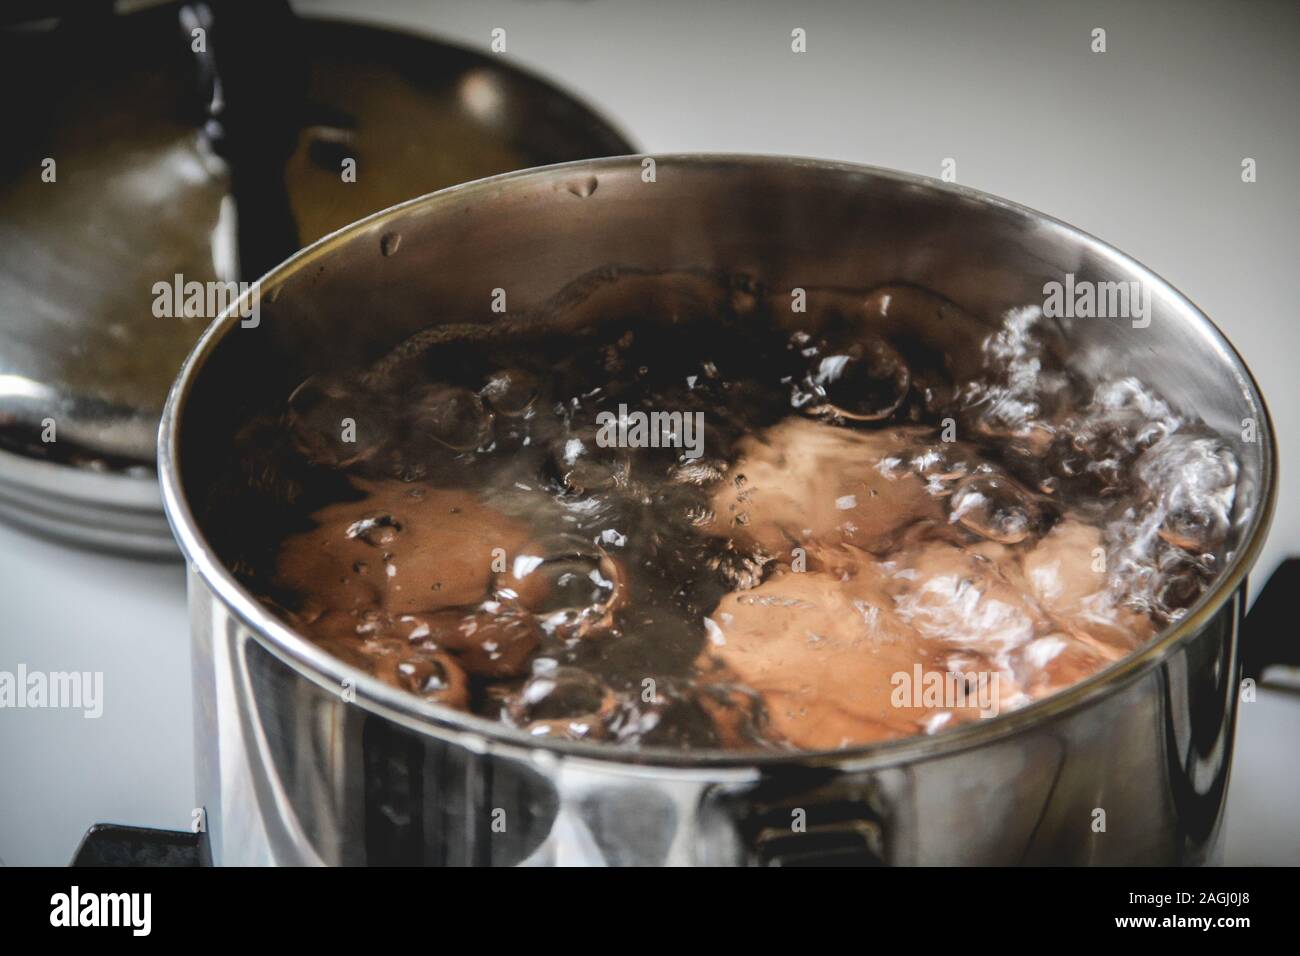 Brown eggs boiling in a small pot on the stove Stock Photo